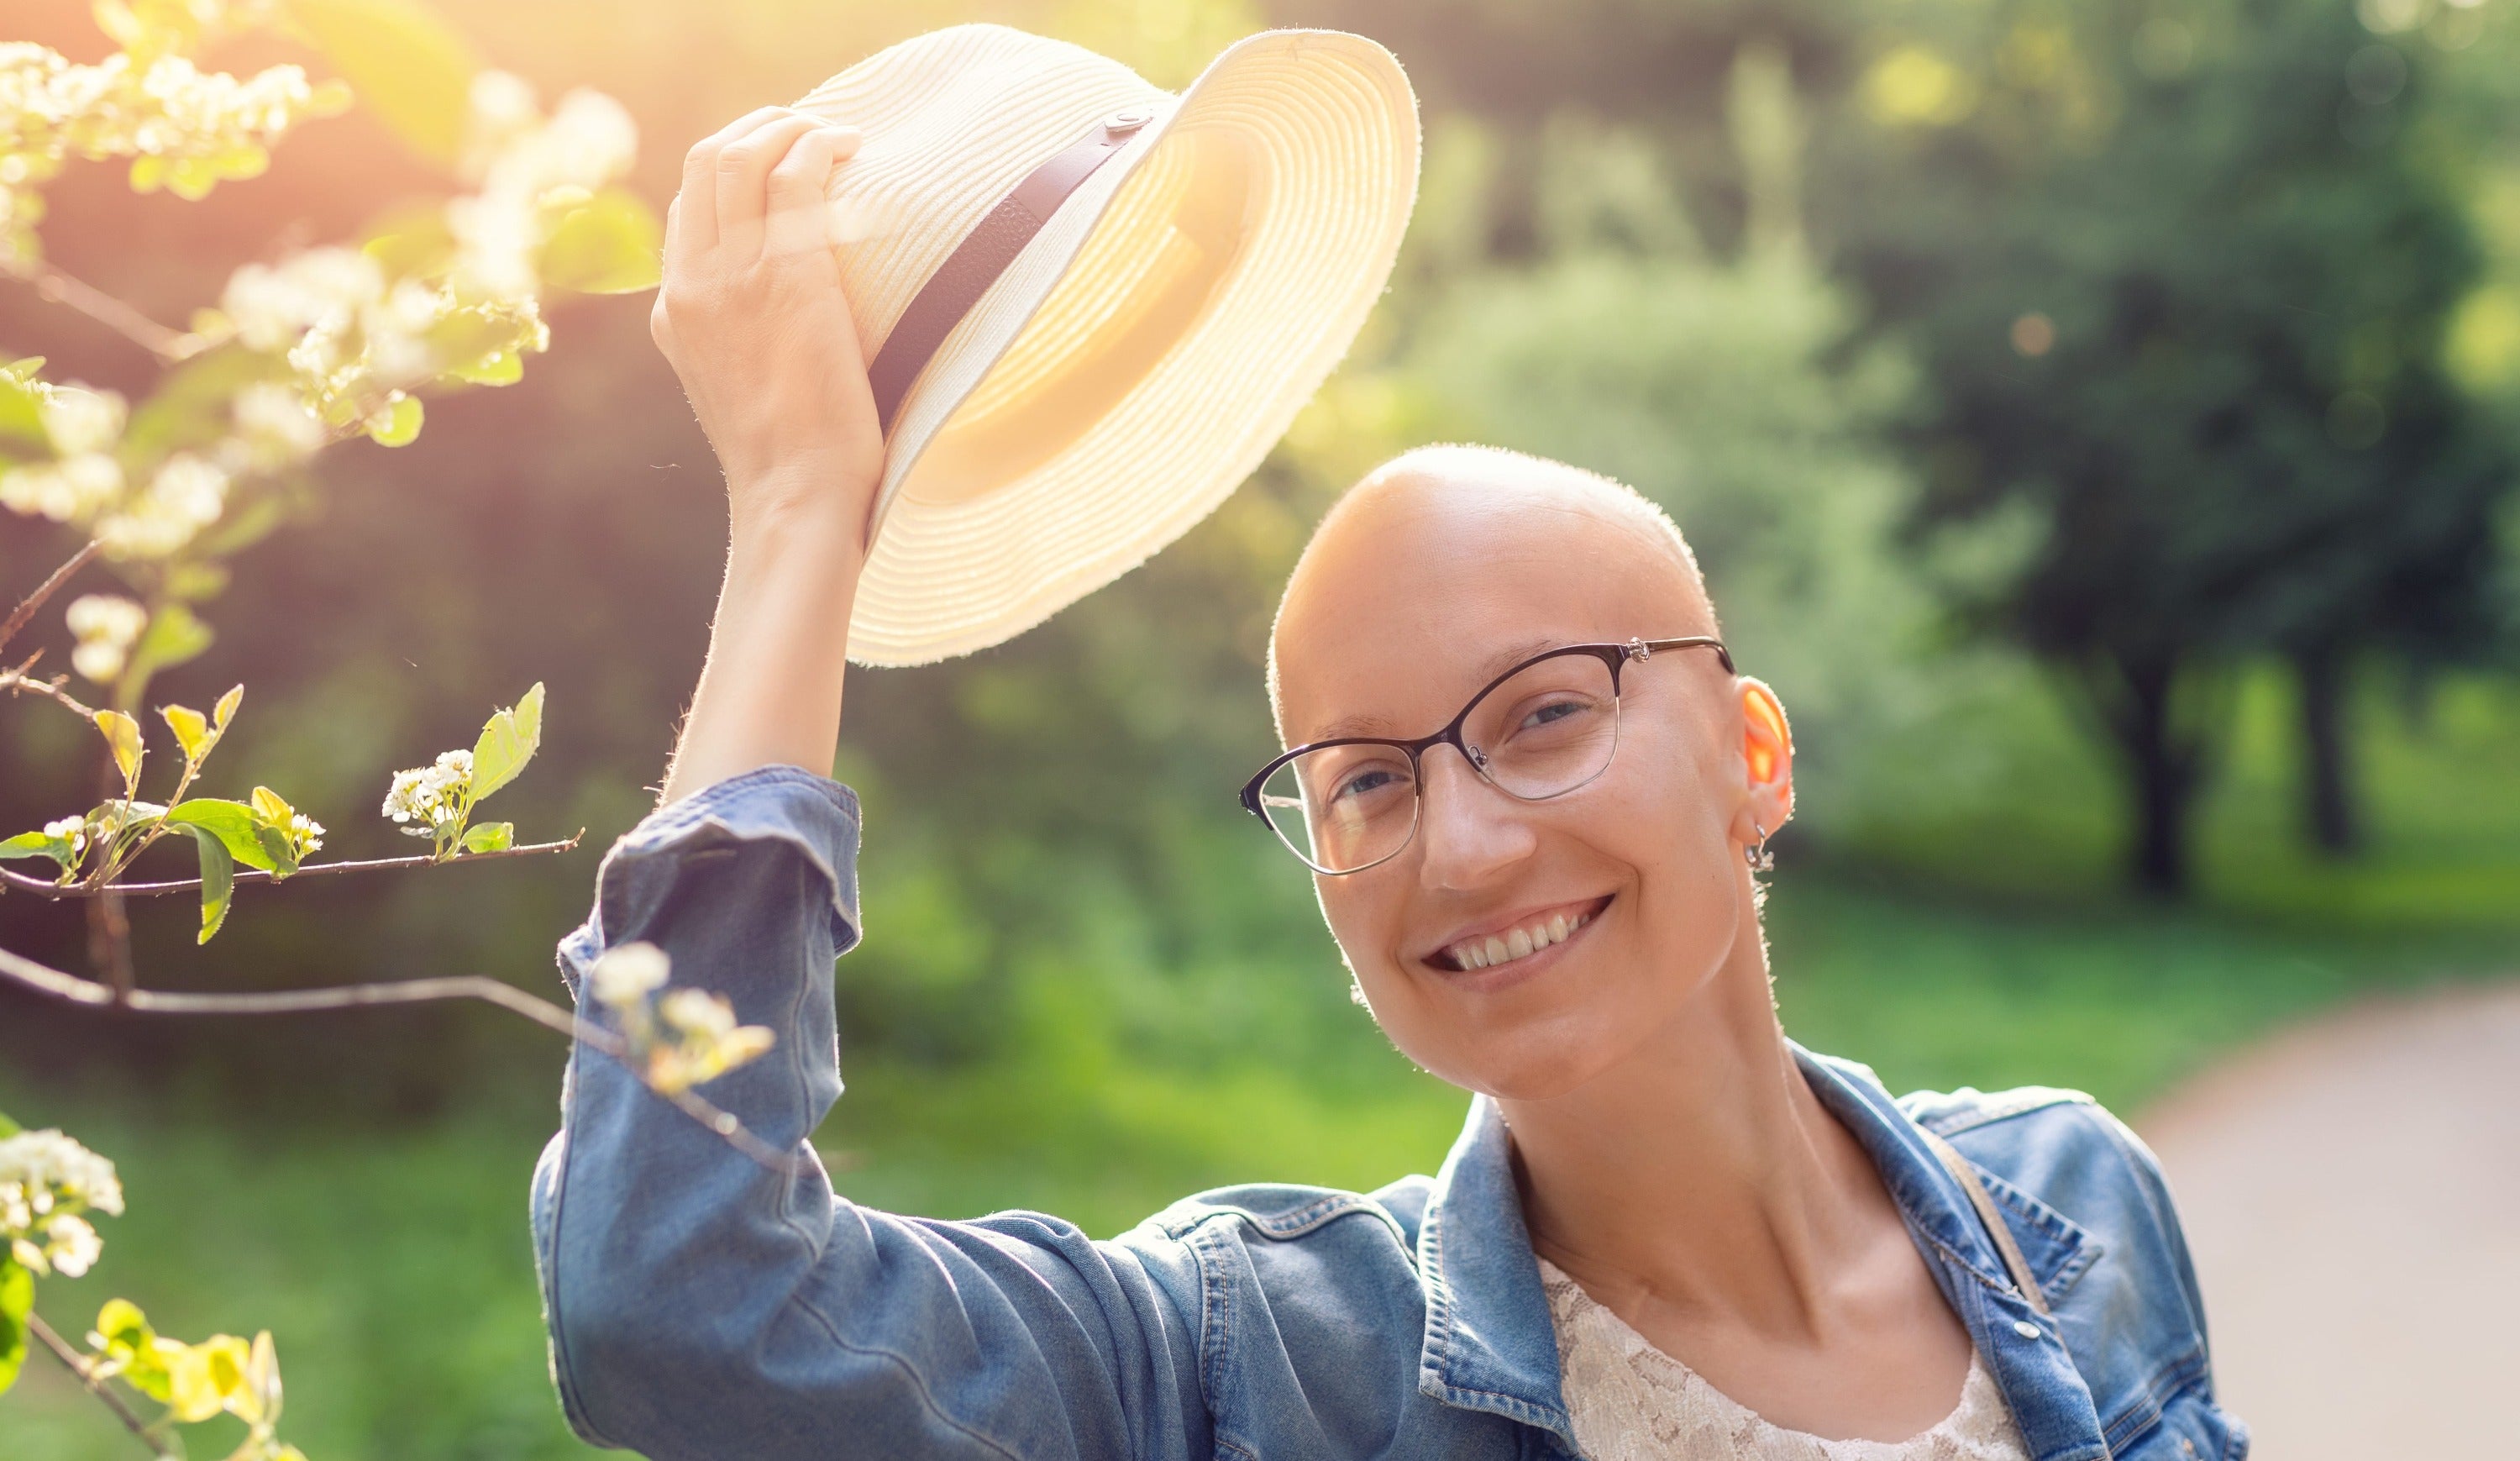 How To Maintain Optimal Mental Health During Cancer Treatment